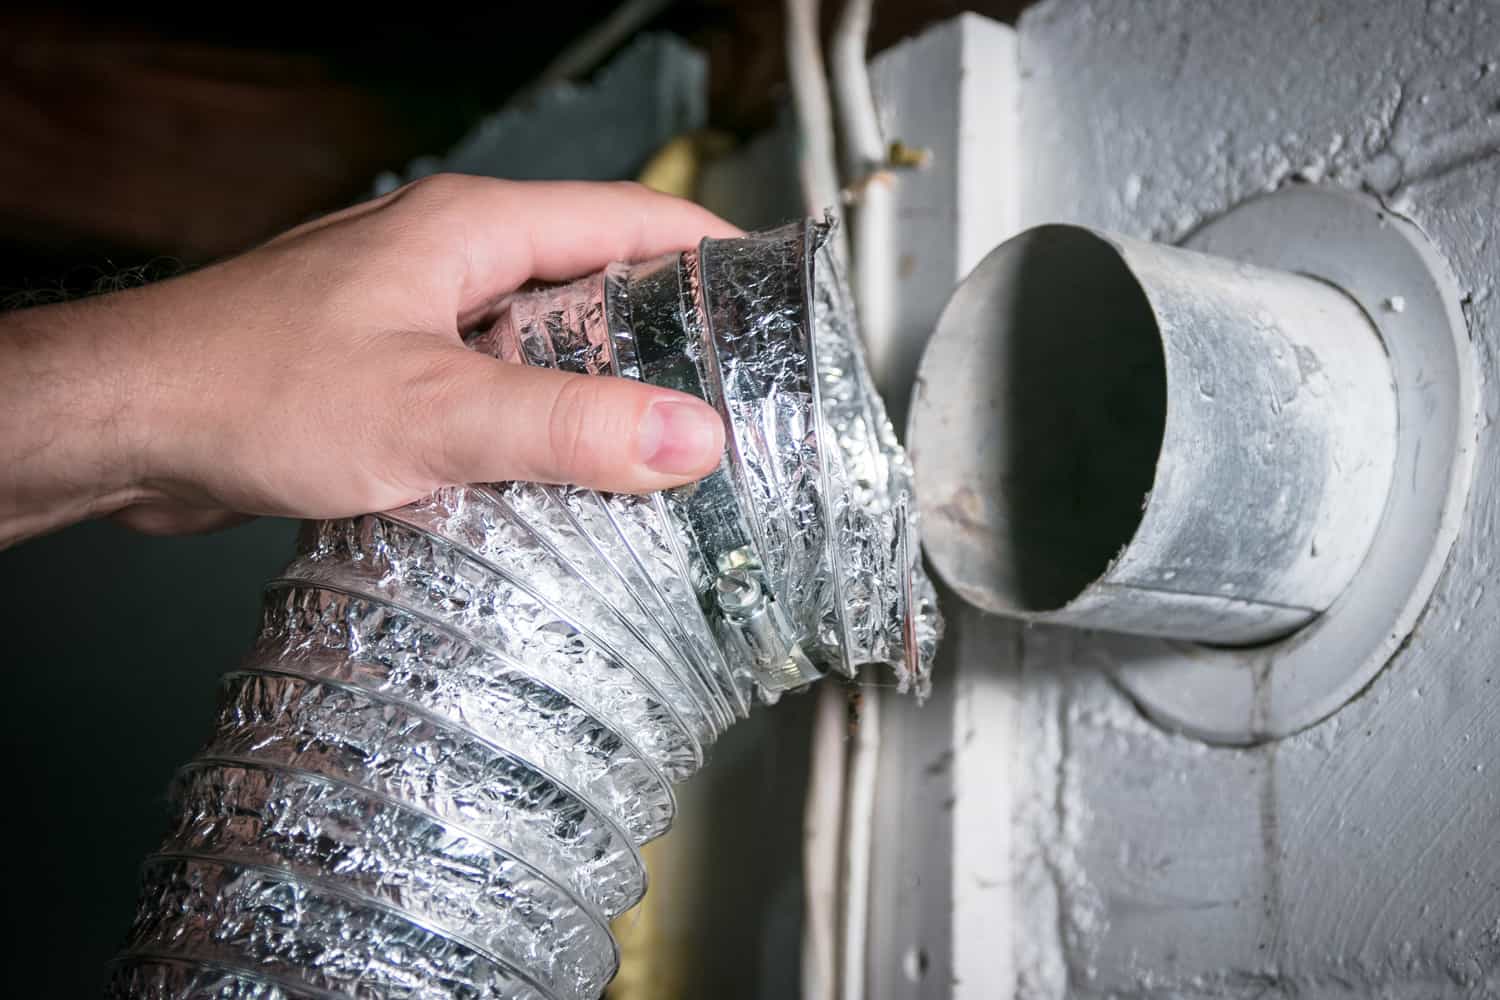 Flexible aluminum dryer vent hose, removed for cleaning repair maintenance.